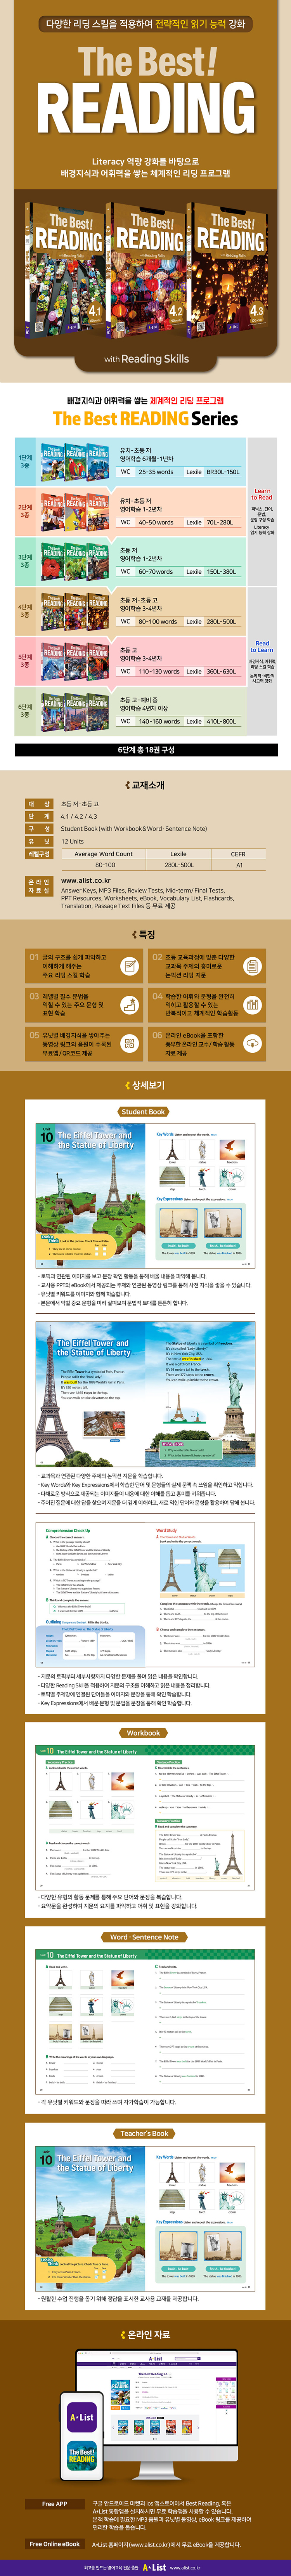 The Best Reading 4.2 (Student Book + Workbook + Word/Sentence Note) 도서 상세이미지